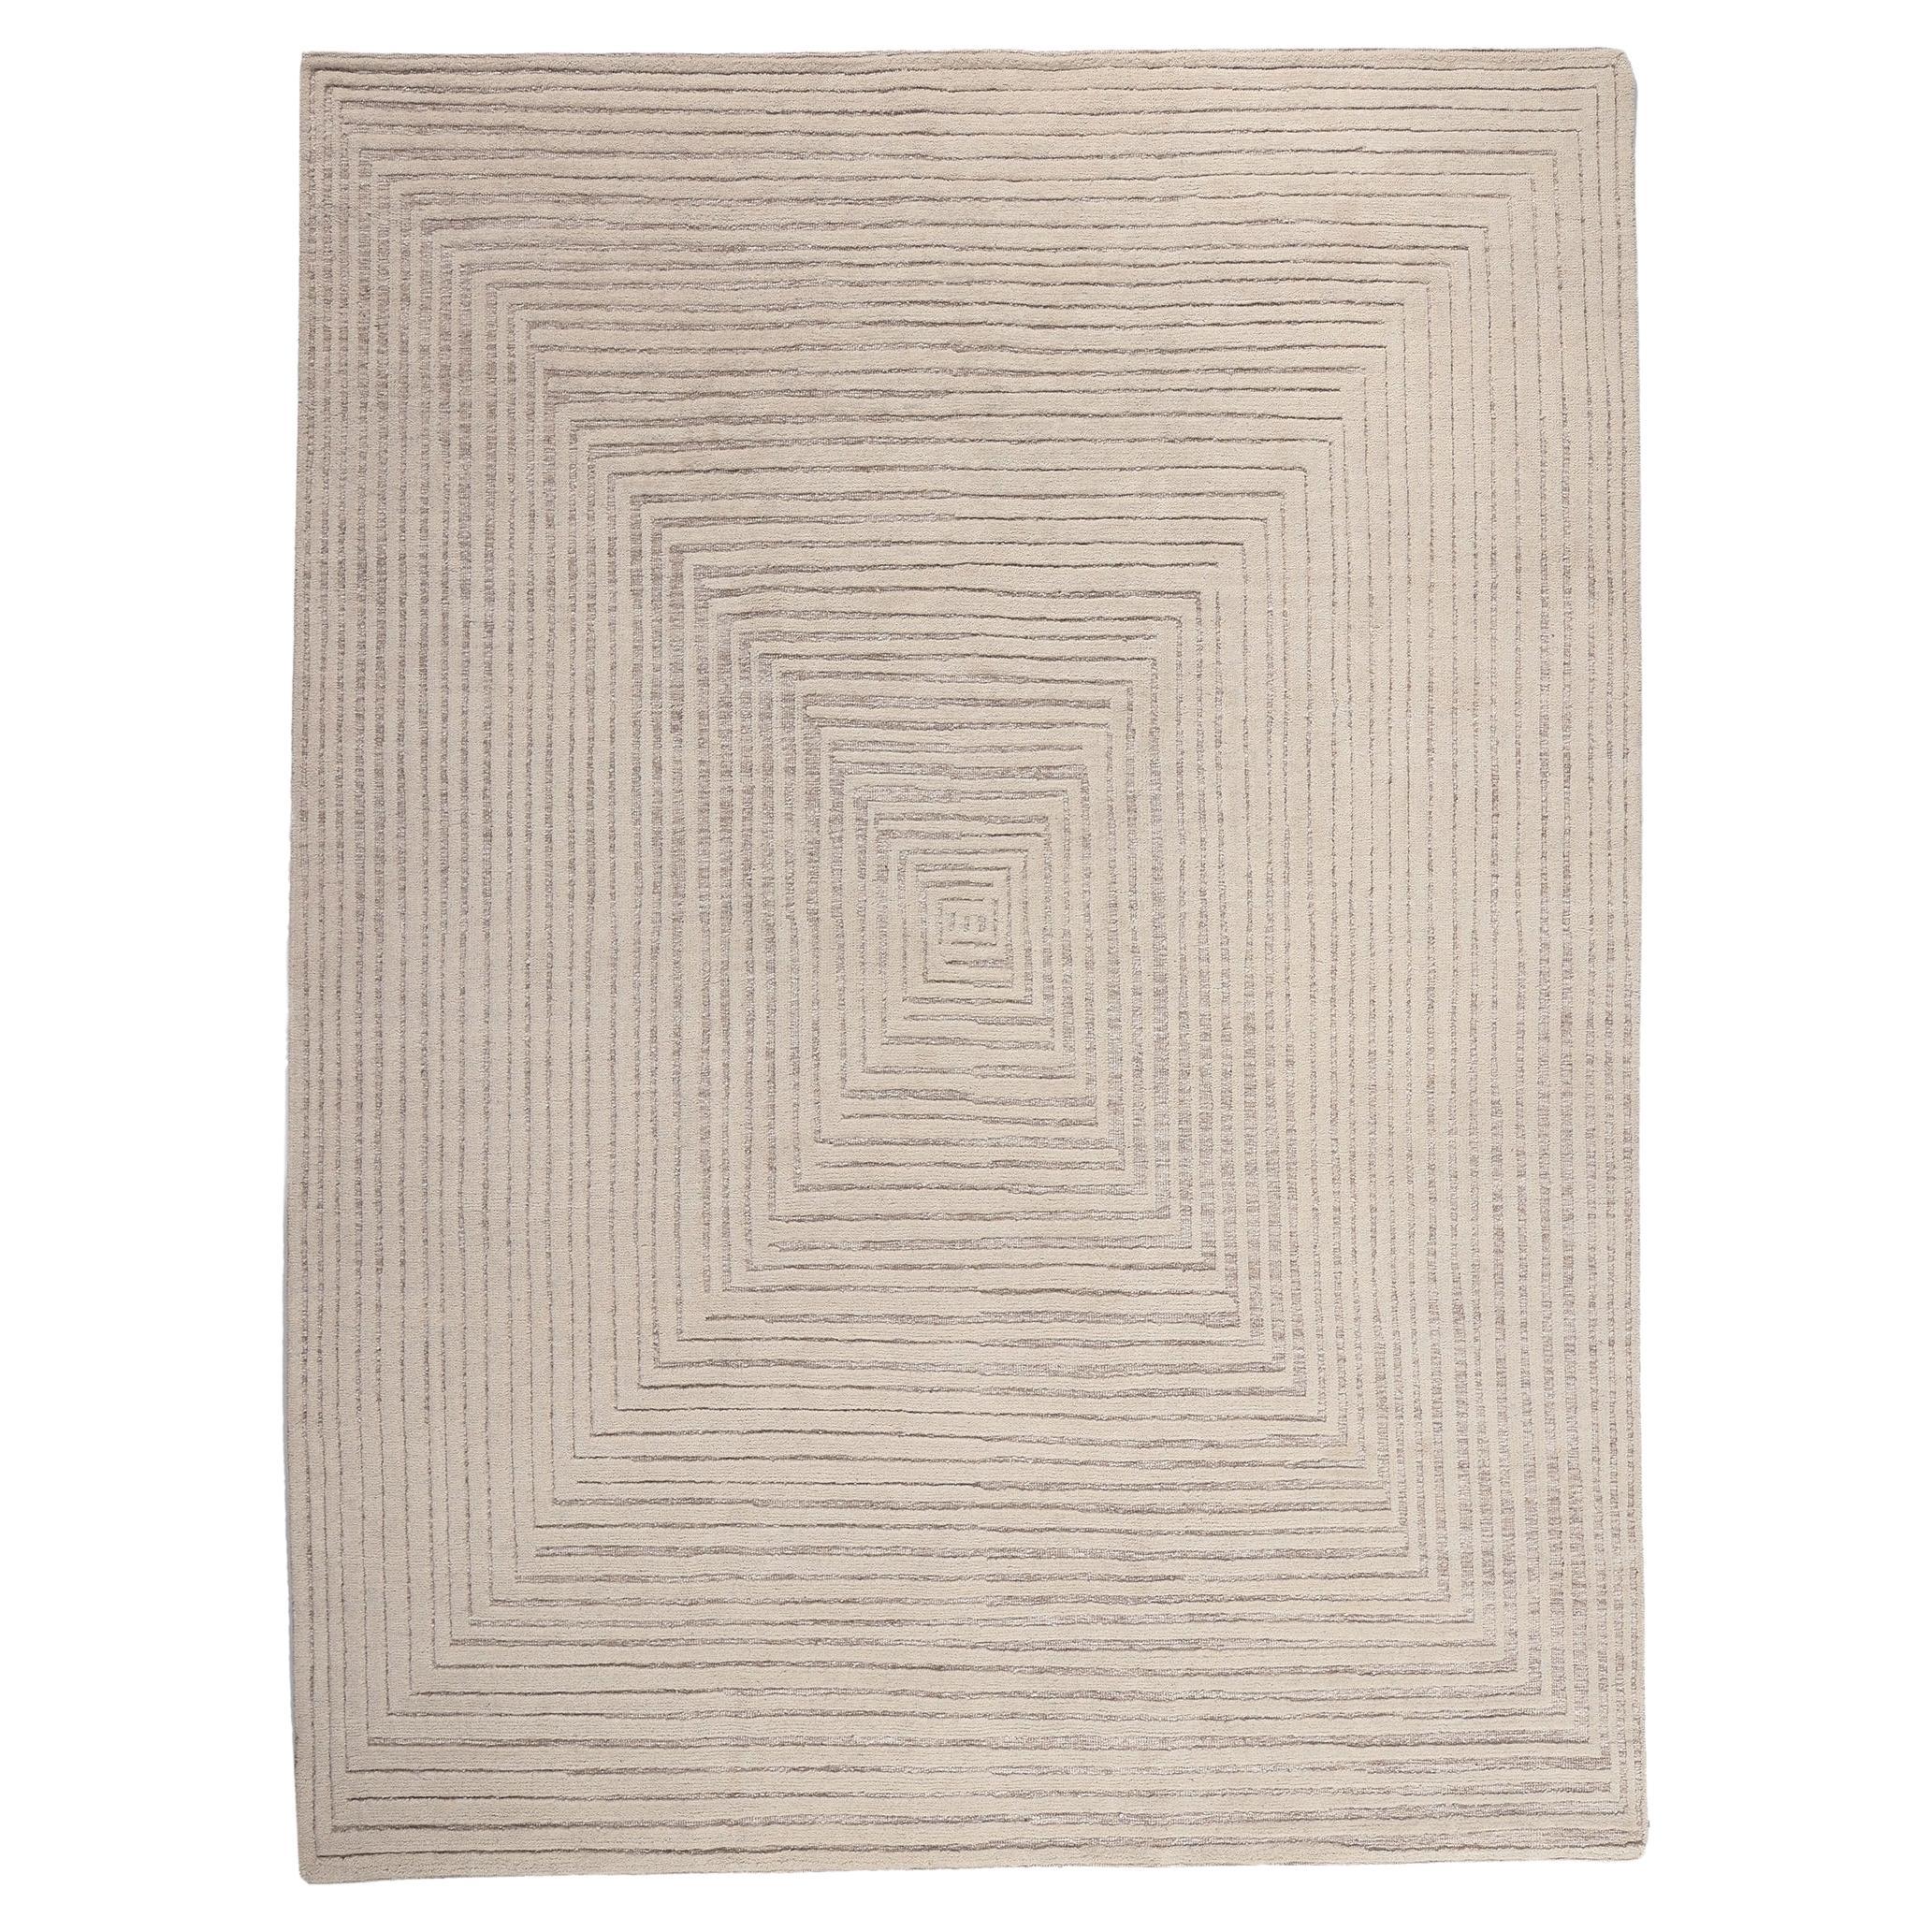 Modern Textured High-Low Rug, Sublime Simplicity Meets Tantalizing Texture